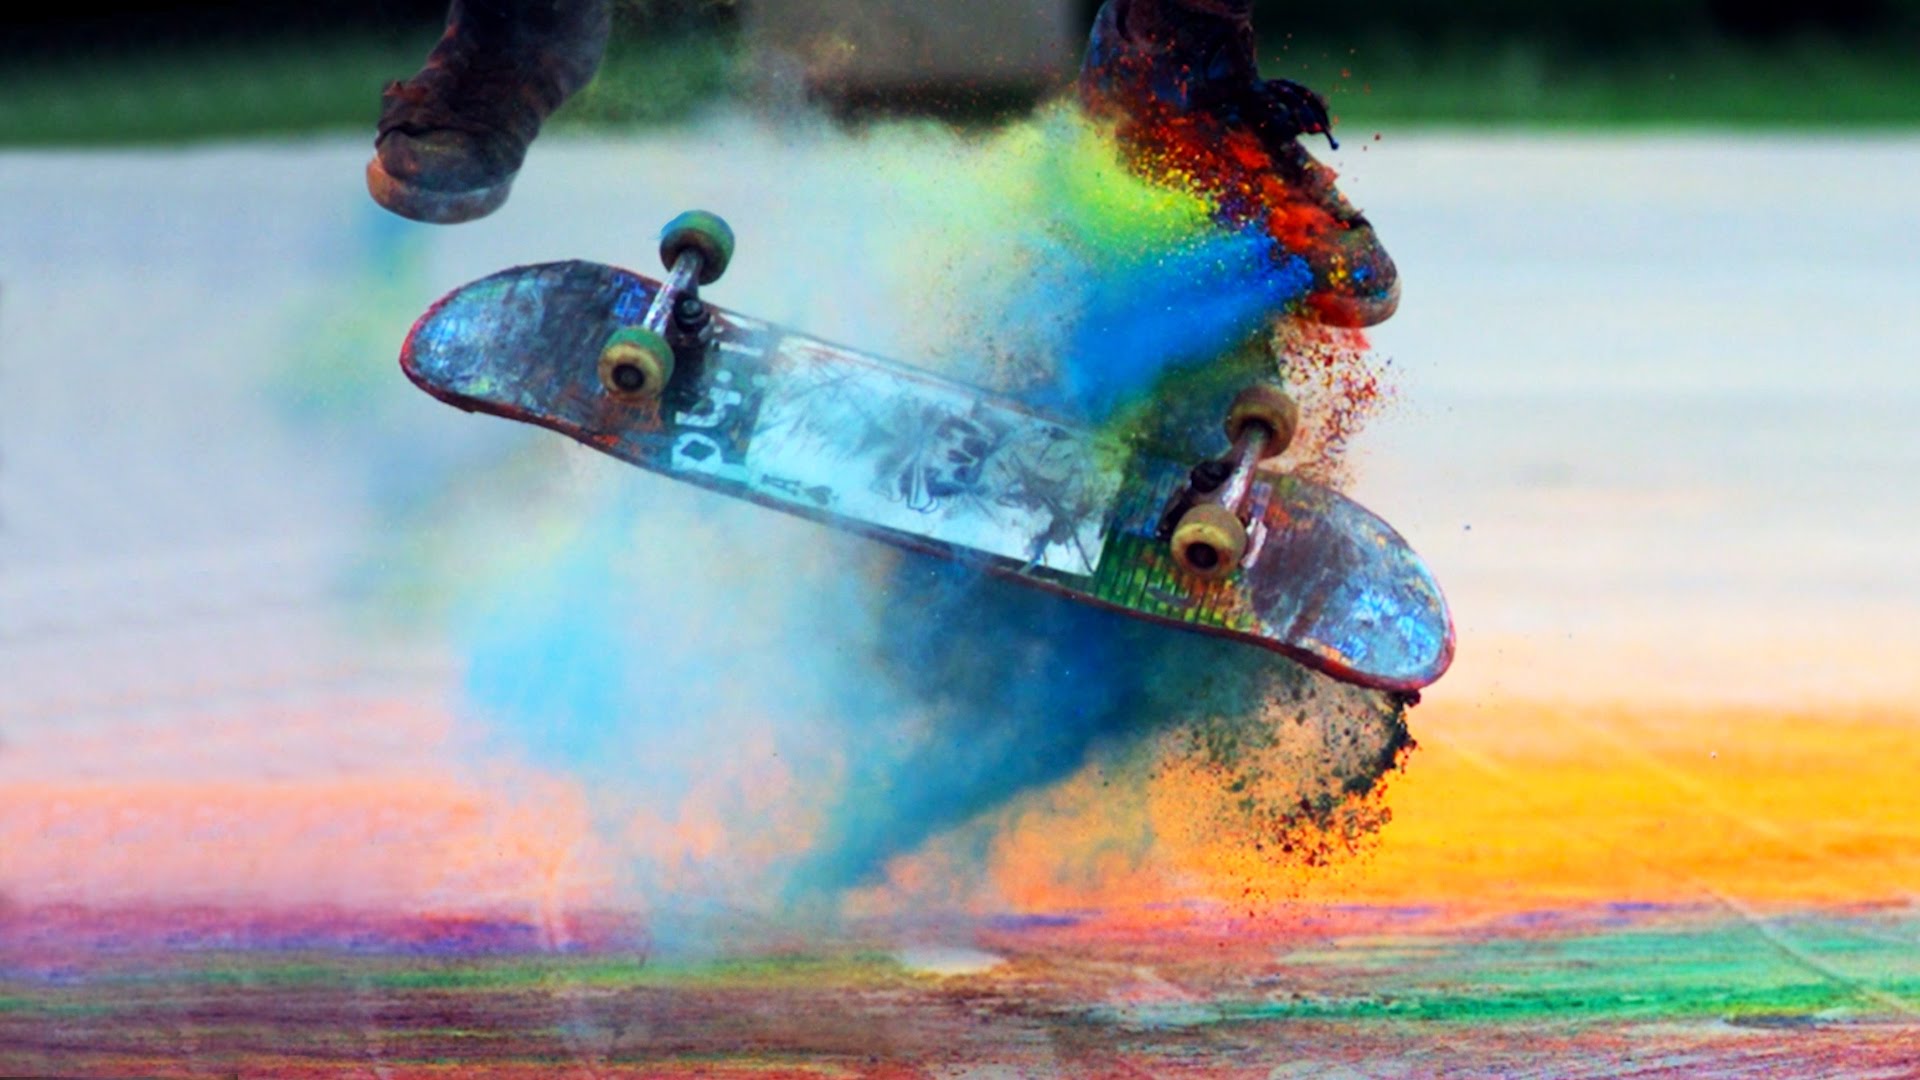 A skater doing a kickflip with colorful powder on the board.